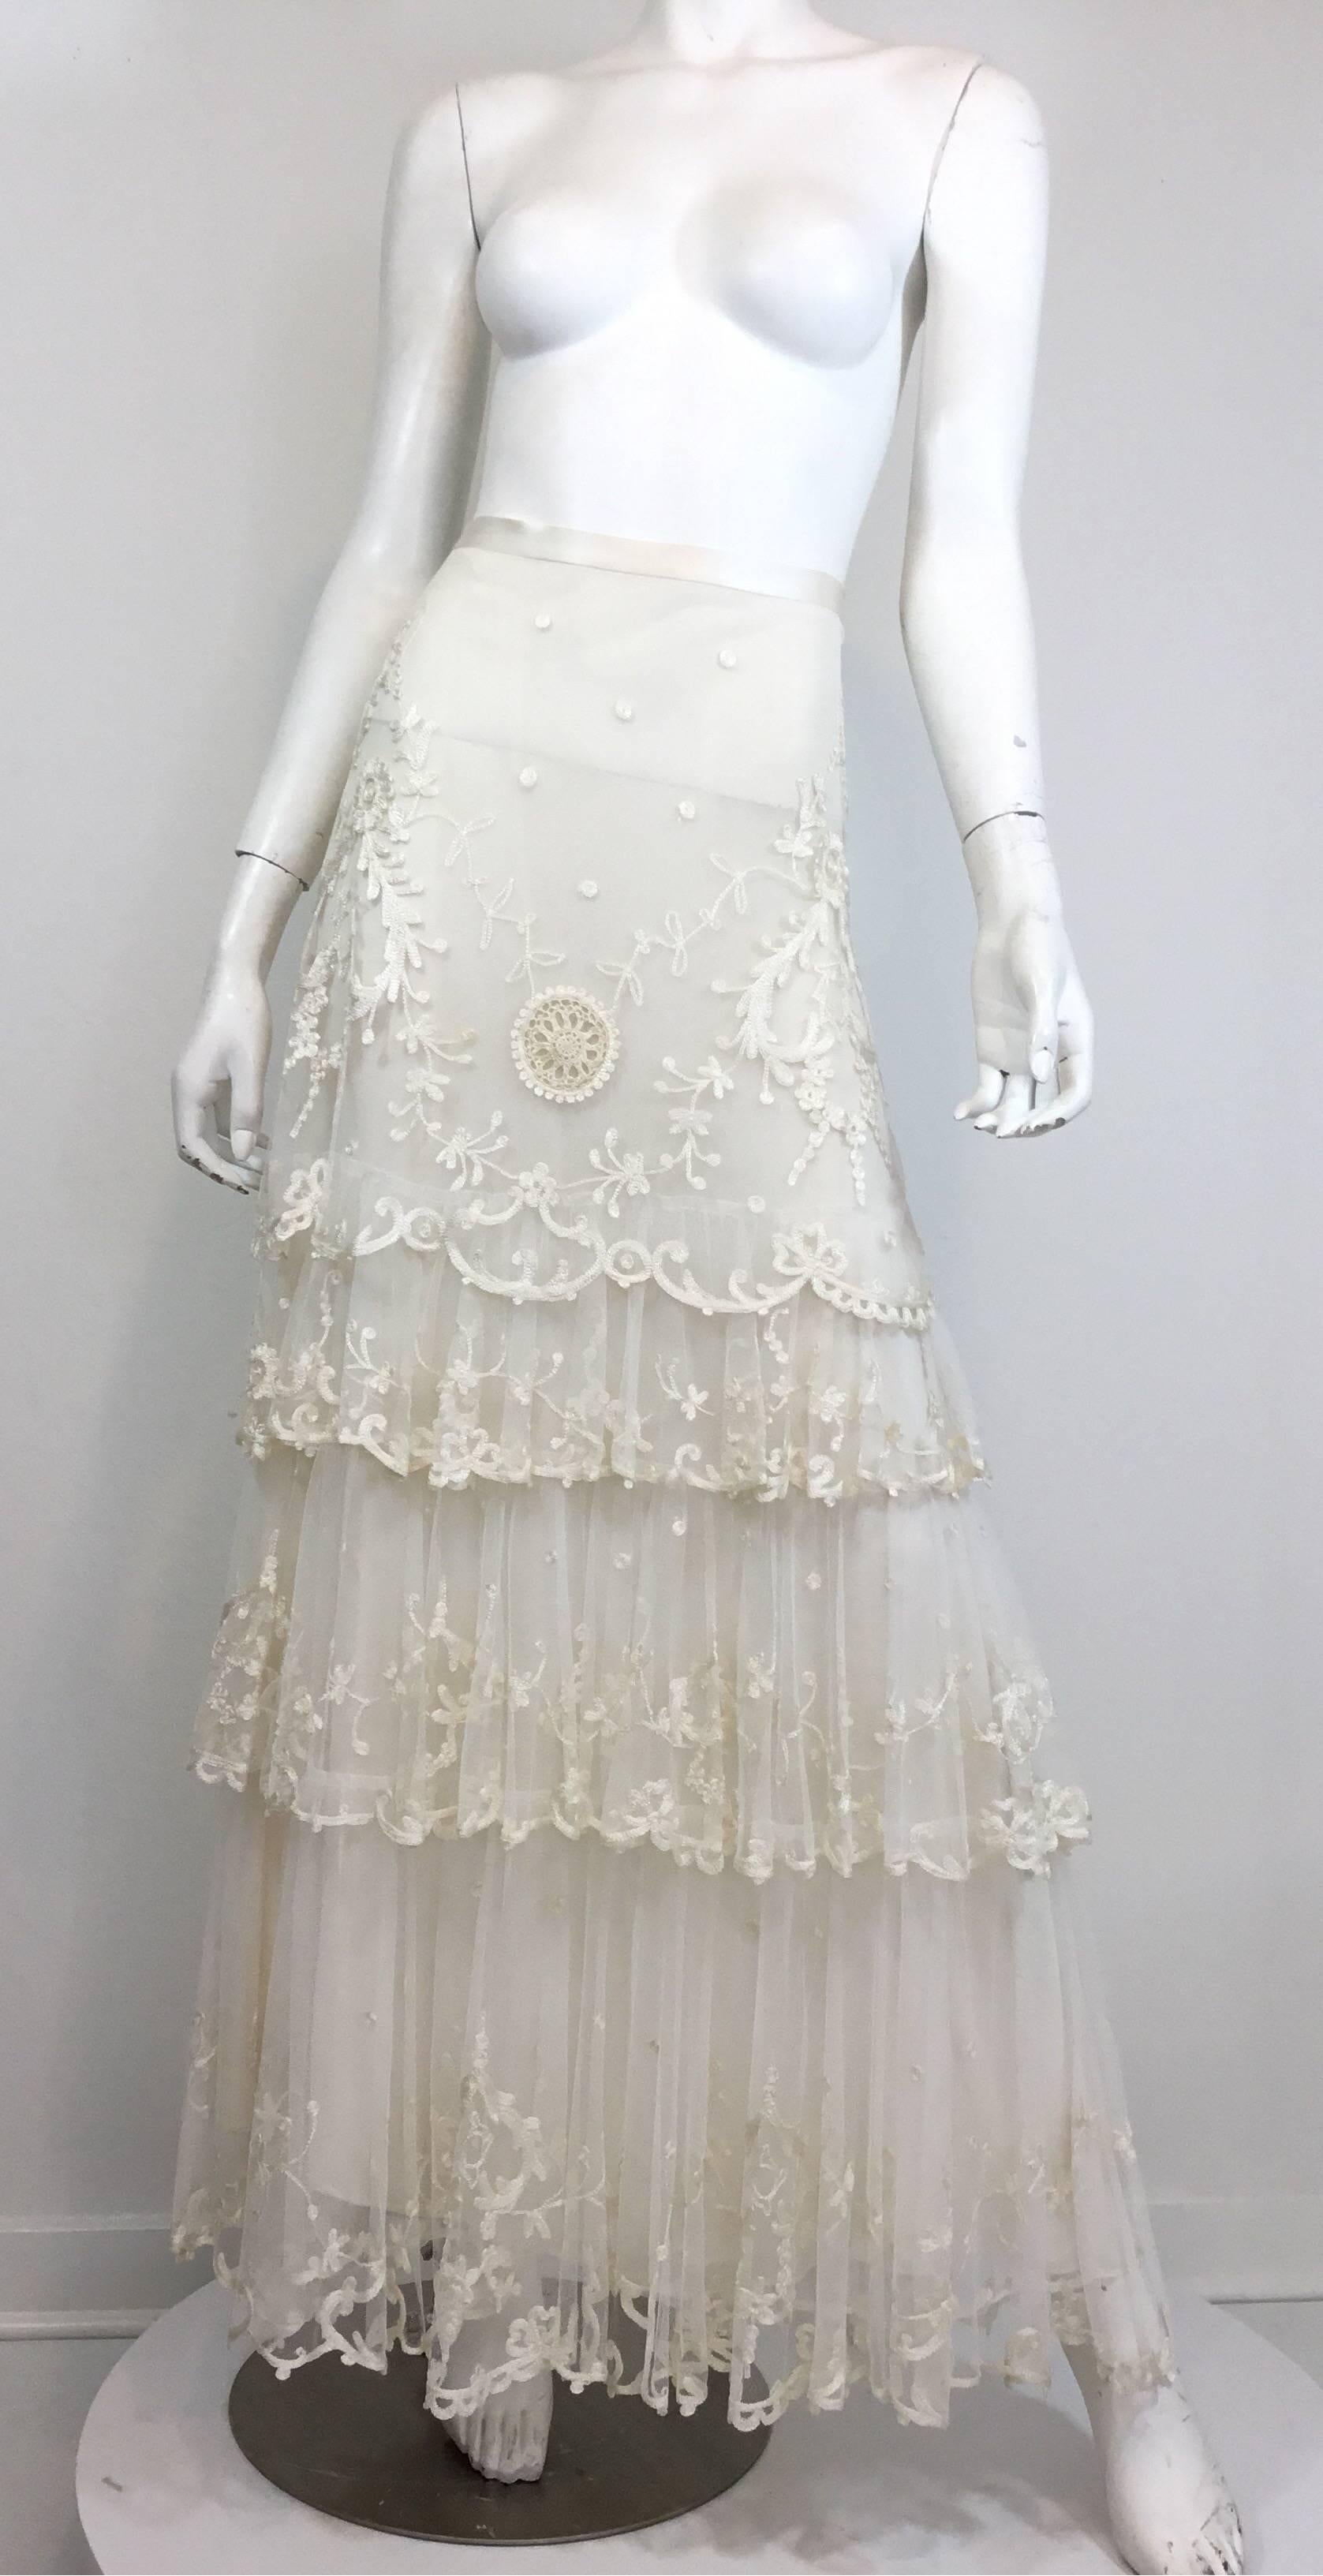 NEW Ralph Lauren skirt featured in a white lace mesh fabric with embroidery throughout, and a tiered design. Back zipper and button fastening. Skirt is a size 10, 100% polyester, retail $3,895, made in Hong Kong.

Waist 30'', hips 38'', length 43''